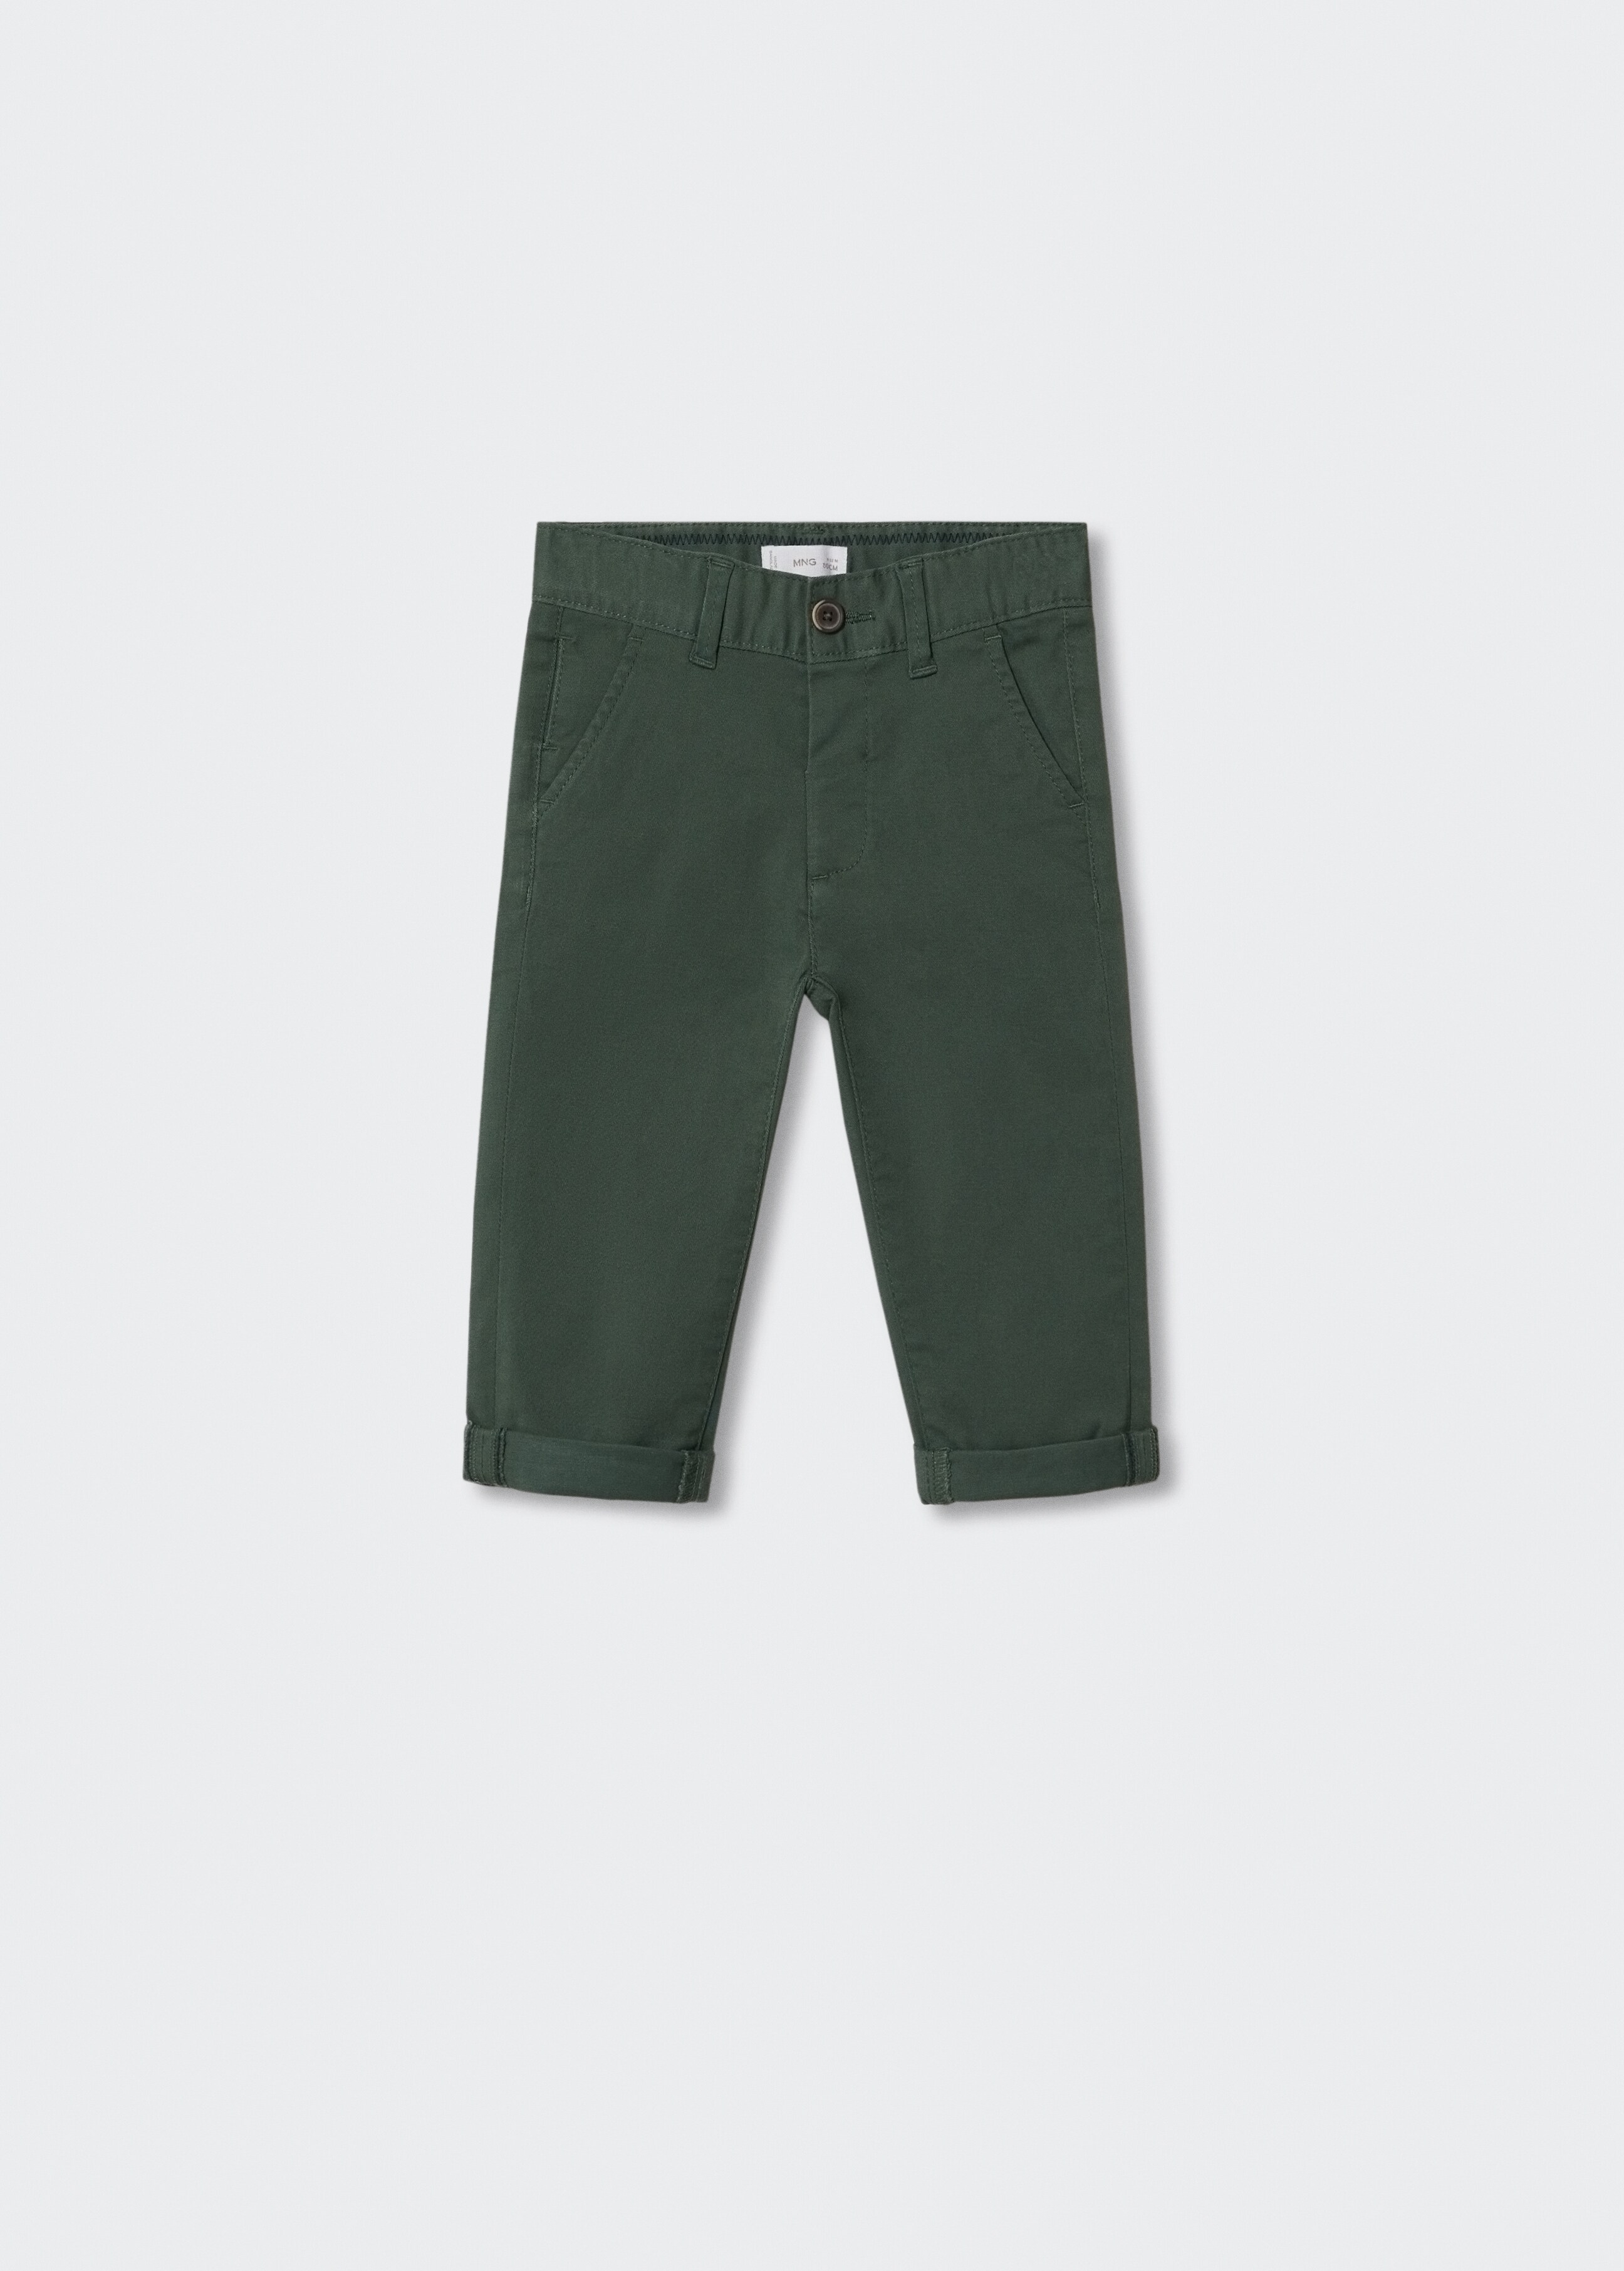 Stretchy chinos - Article without model